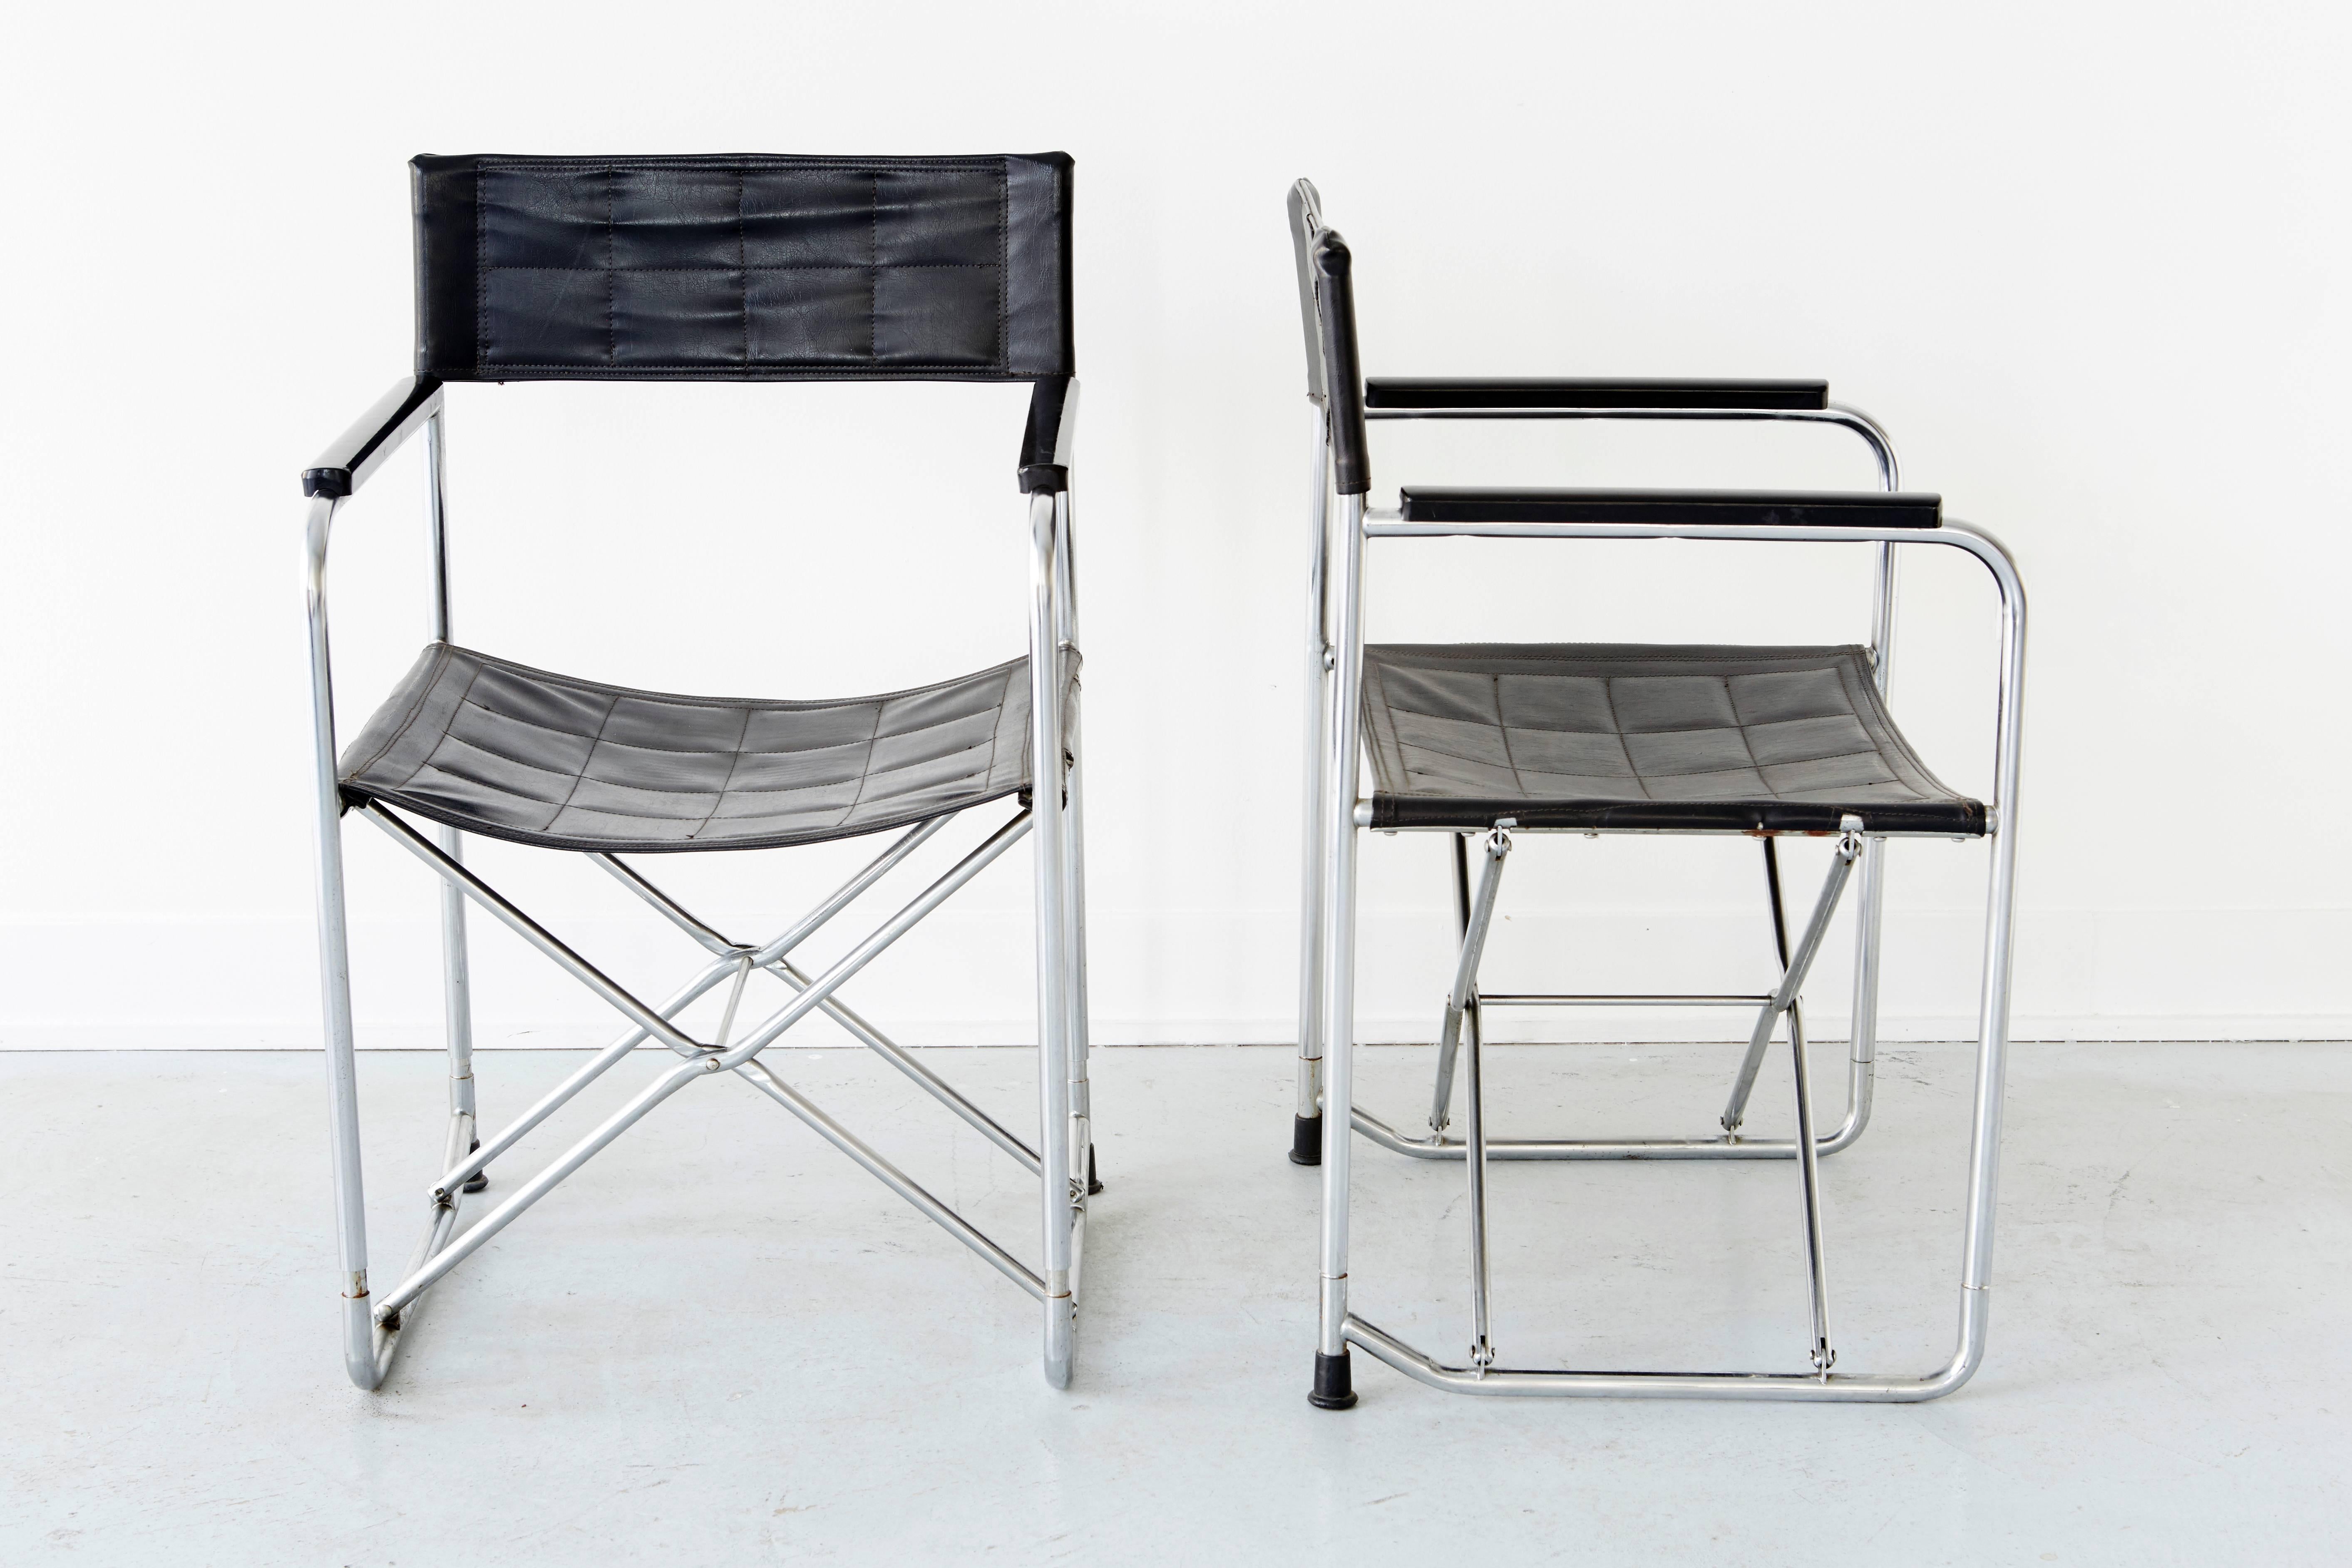 Pair of Japanese Uchida Mid-Century Folding Chairs.  These sleek vinyl and chrome folding chairs are in excellent overall condition.  